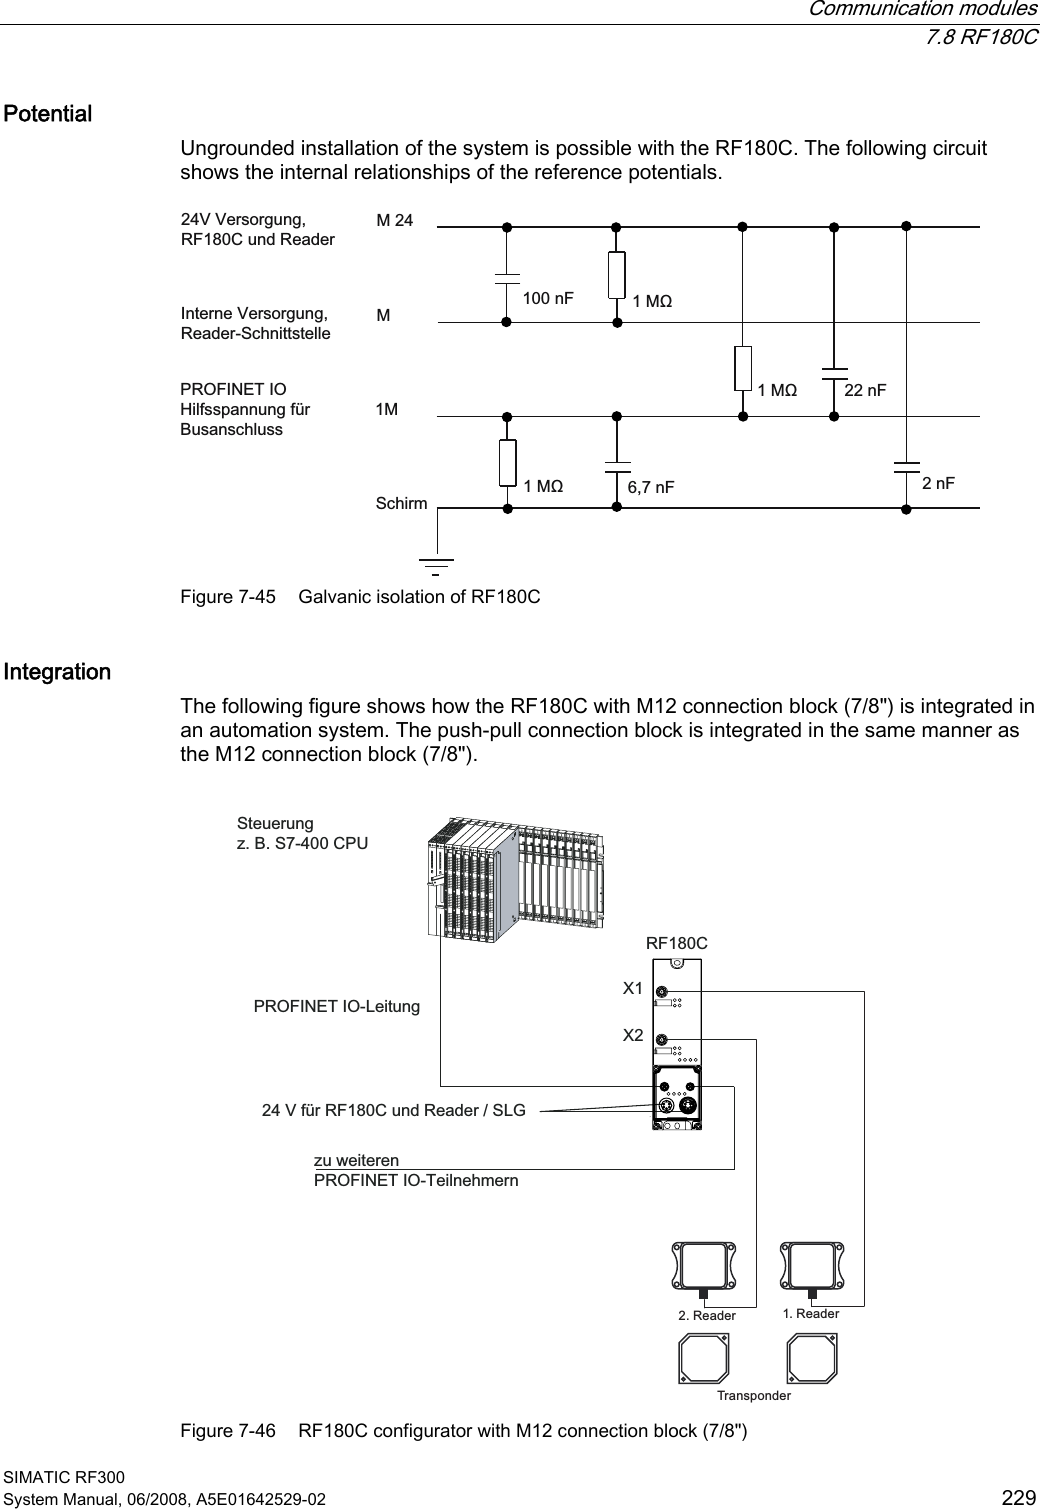  Communication modules  7.8 RF180C SIMATIC RF300 System Manual, 06/2008, A5E01642529-02  229 Potential Ungrounded installation of the system is possible with the RF180C. The following circuit shows the internal relationships of the reference potentials. 0˖0˖0˖Q)Q)Q) Q)0006FKLUP99HUVRUJXQJ5)&amp;XQG5HDGHU,QWHUQH9HUVRUJXQJ5HDGHU6FKQLWWVWHOOH352),1(7,2+LOIVVSDQQXQJI¾U%XVDQVFKOXVV Figure 7-45  Galvanic isolation of RF180C Integration The following figure shows how the RF180C with M12 connection block (7/8&quot;) is integrated in an automation system. The push-pull connection block is integrated in the same manner as the M12 connection block (7/8&quot;). 6WHXHUXQJ]%6&amp;38352),1(7,2/HLWXQJ]XZHLWHUHQ352),1(7,27HLOQHKPHUQ9I¾U5)&amp;XQG5HDGHU6/*5HDGHU 5HDGHU7UDQVSRQGHU;;5)&amp; Figure 7-46  RF180C configurator with M12 connection block (7/8&quot;) 